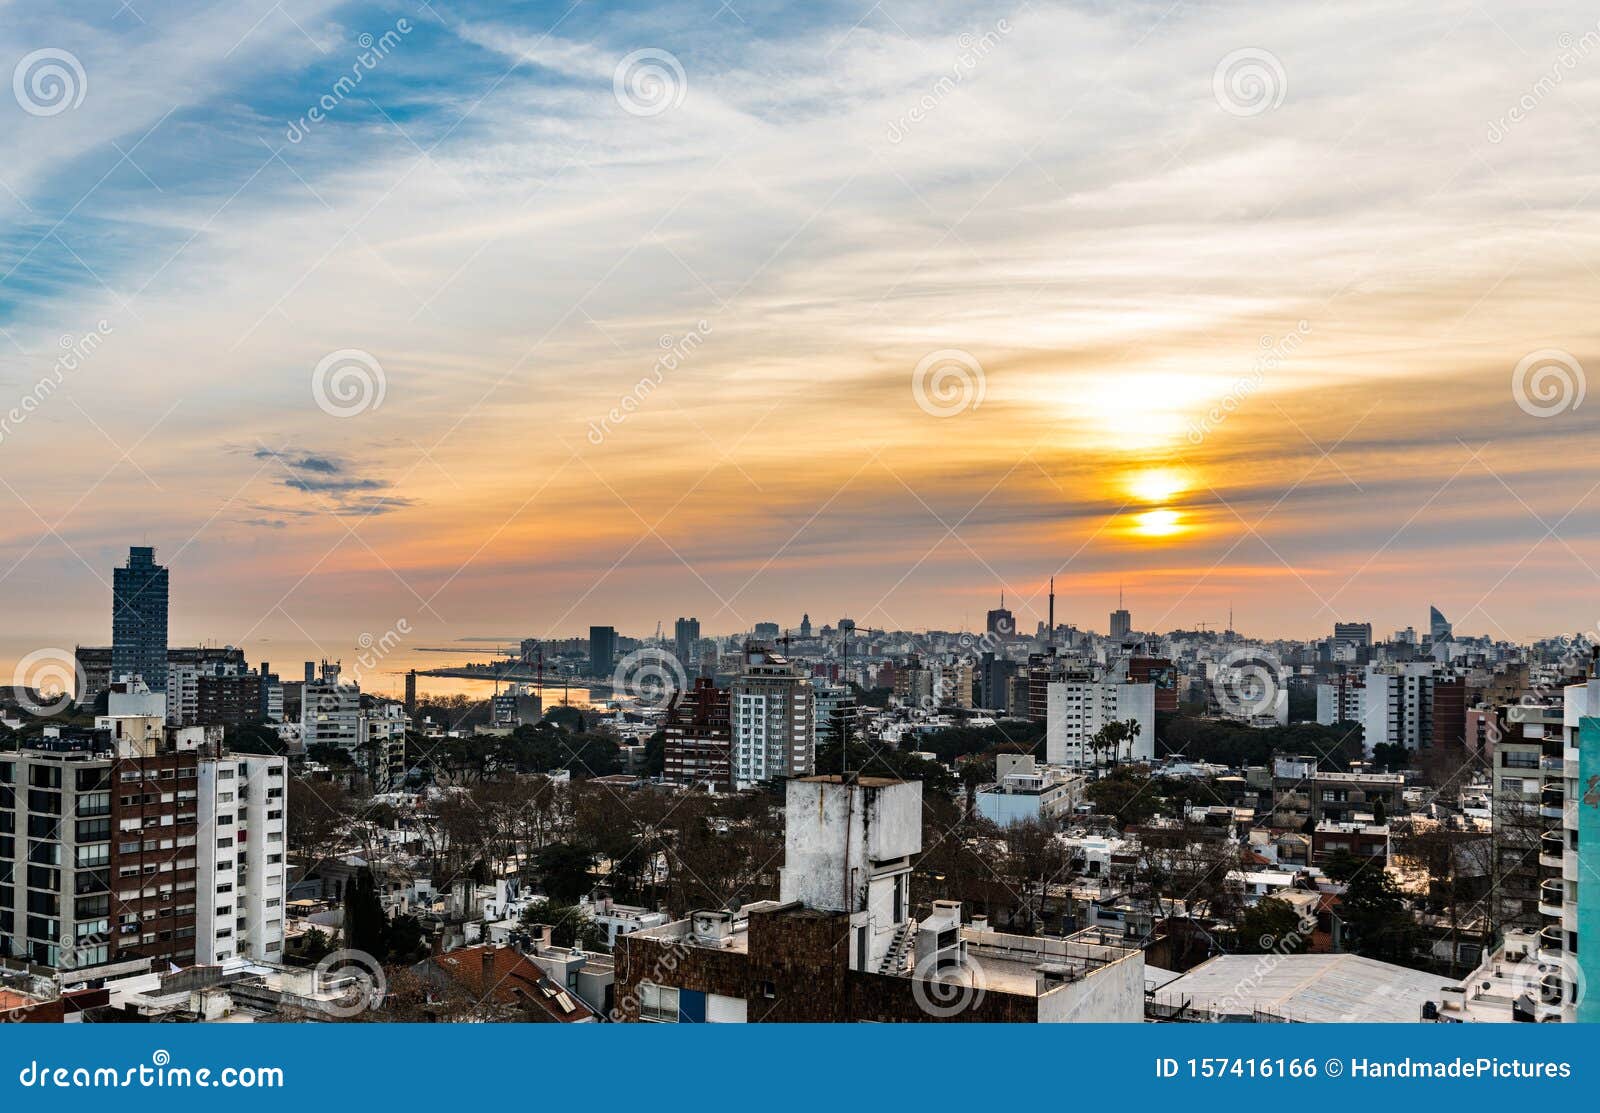 sunset in montevideo the capital of uruguay, south america